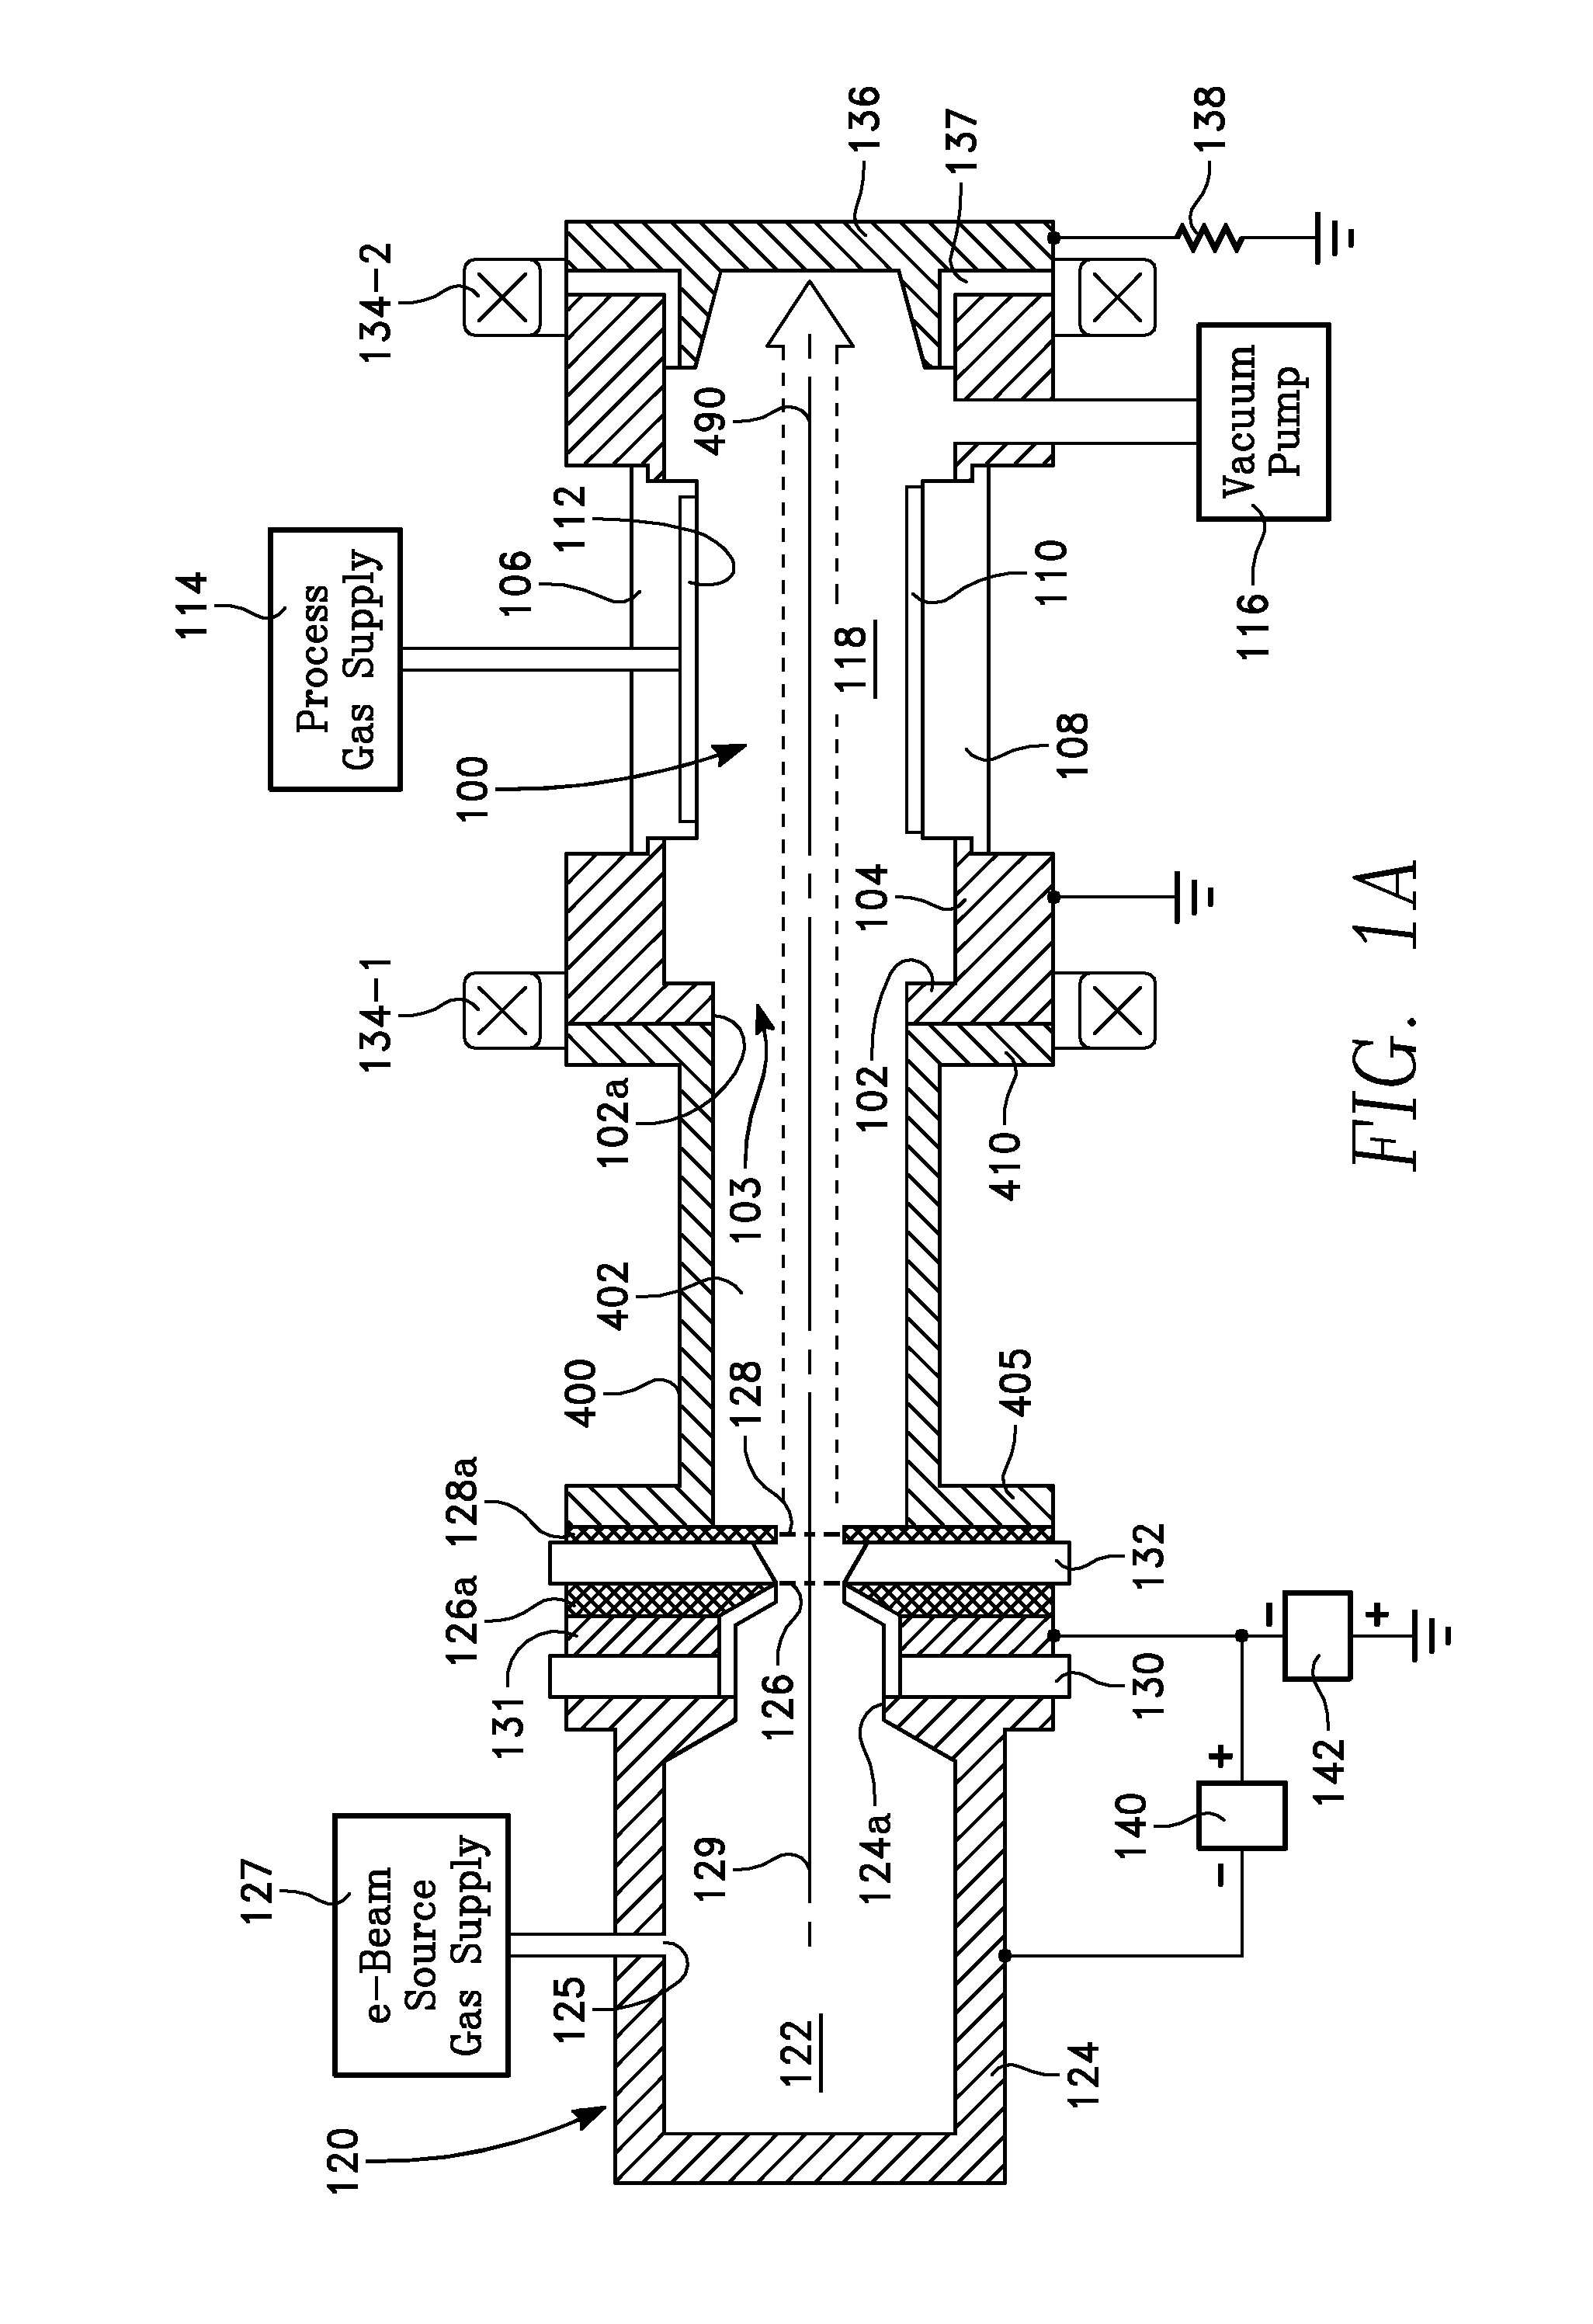 Electron beam plasma source with reduced metal contamination